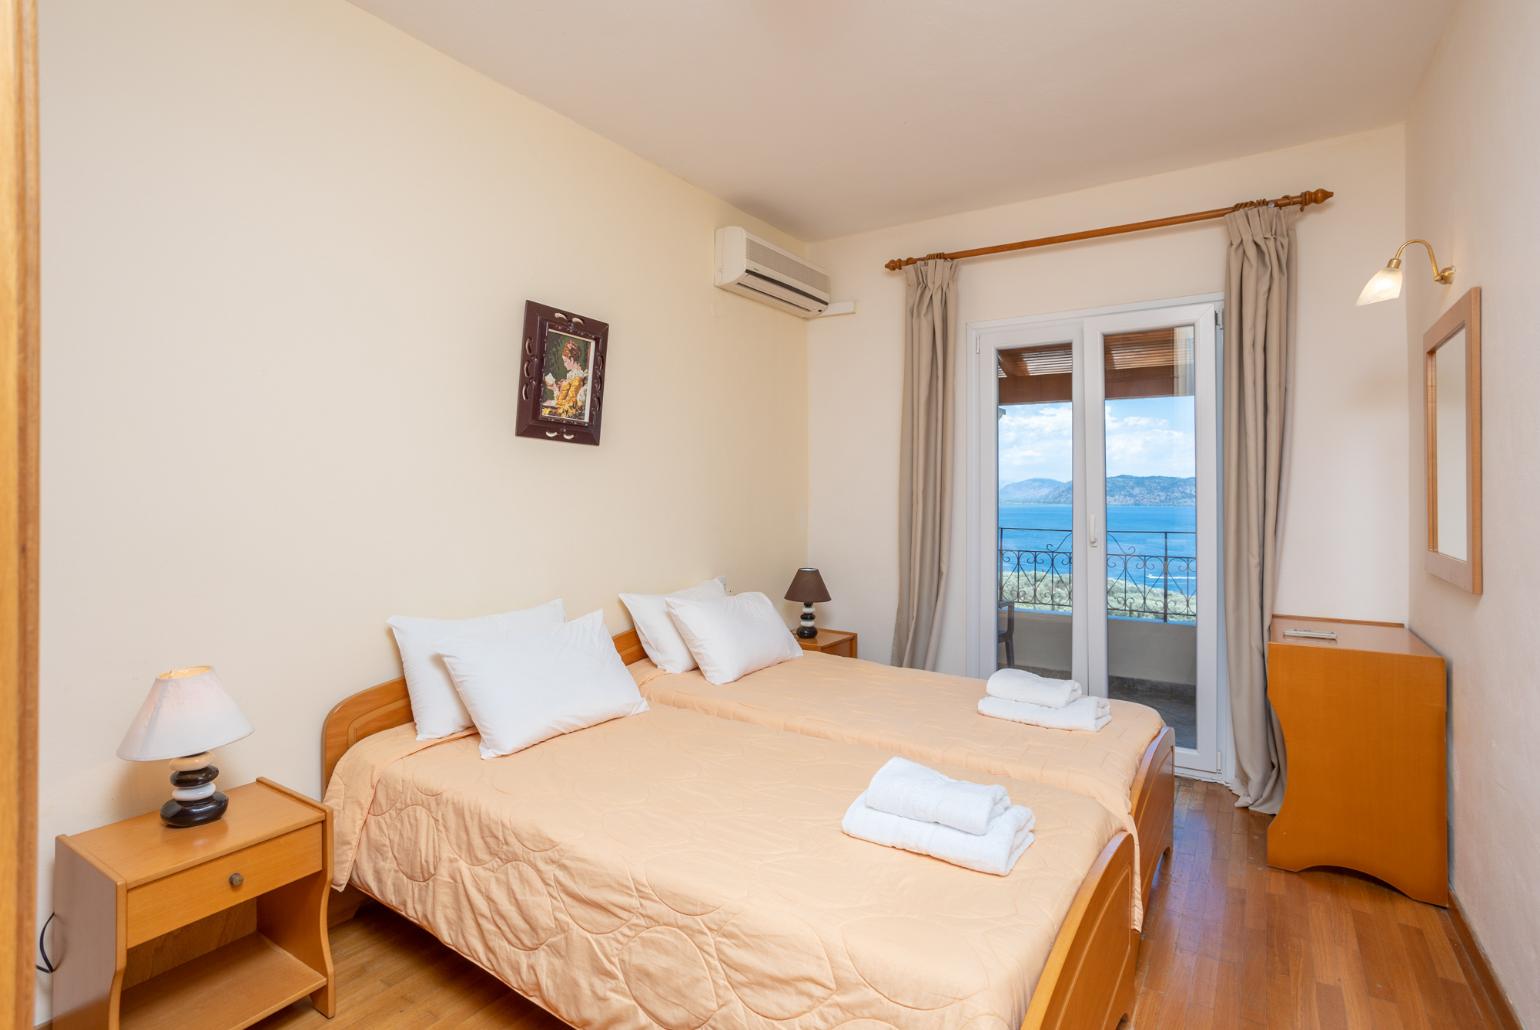 Twin bedroom with A/C and balcony access with panoramic sea views